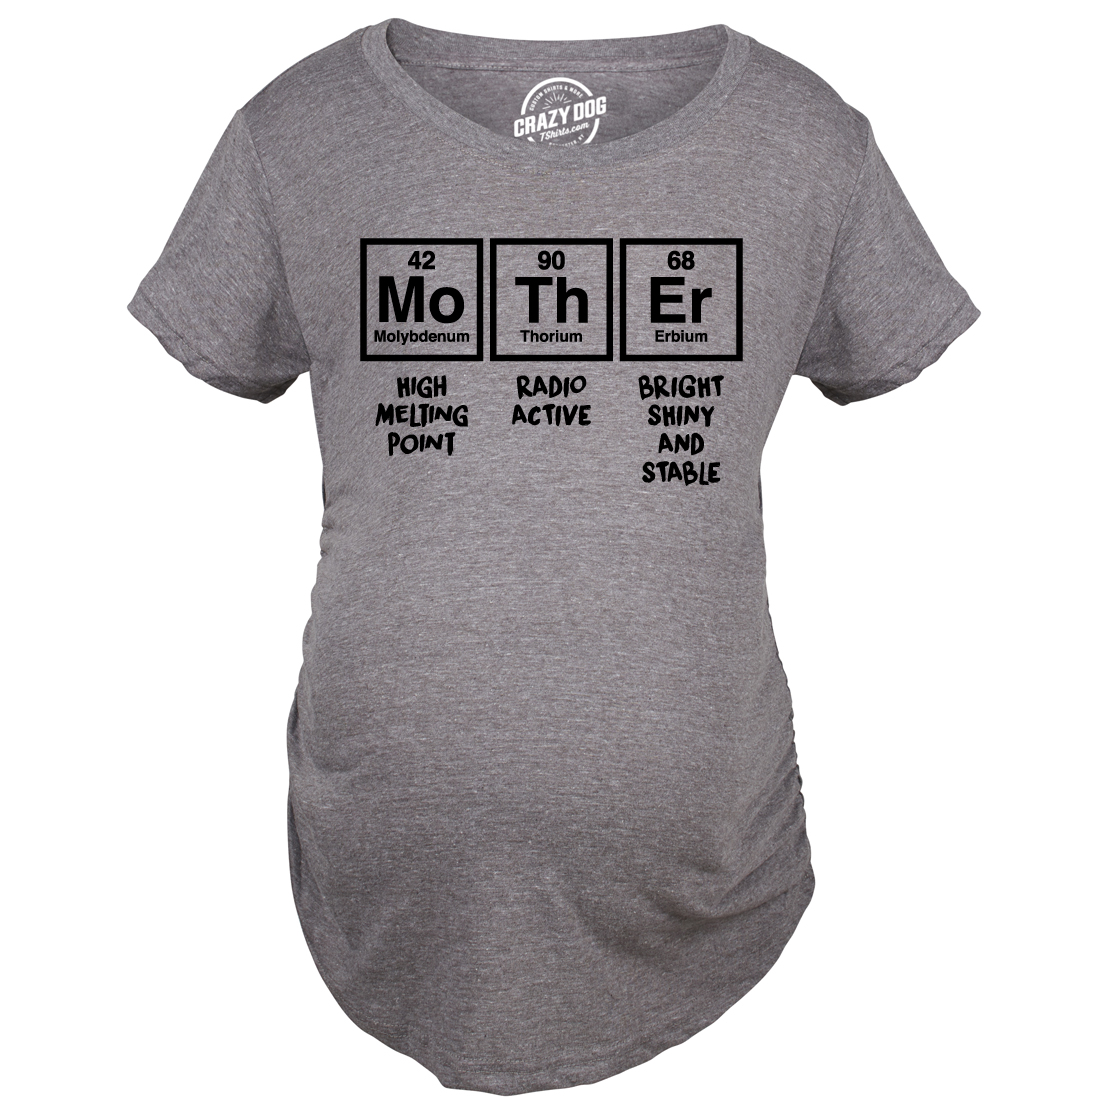 Crazy Dog Tshirts Maternity Periodic Mother Pregnancy Tshirt Funny Science Tee